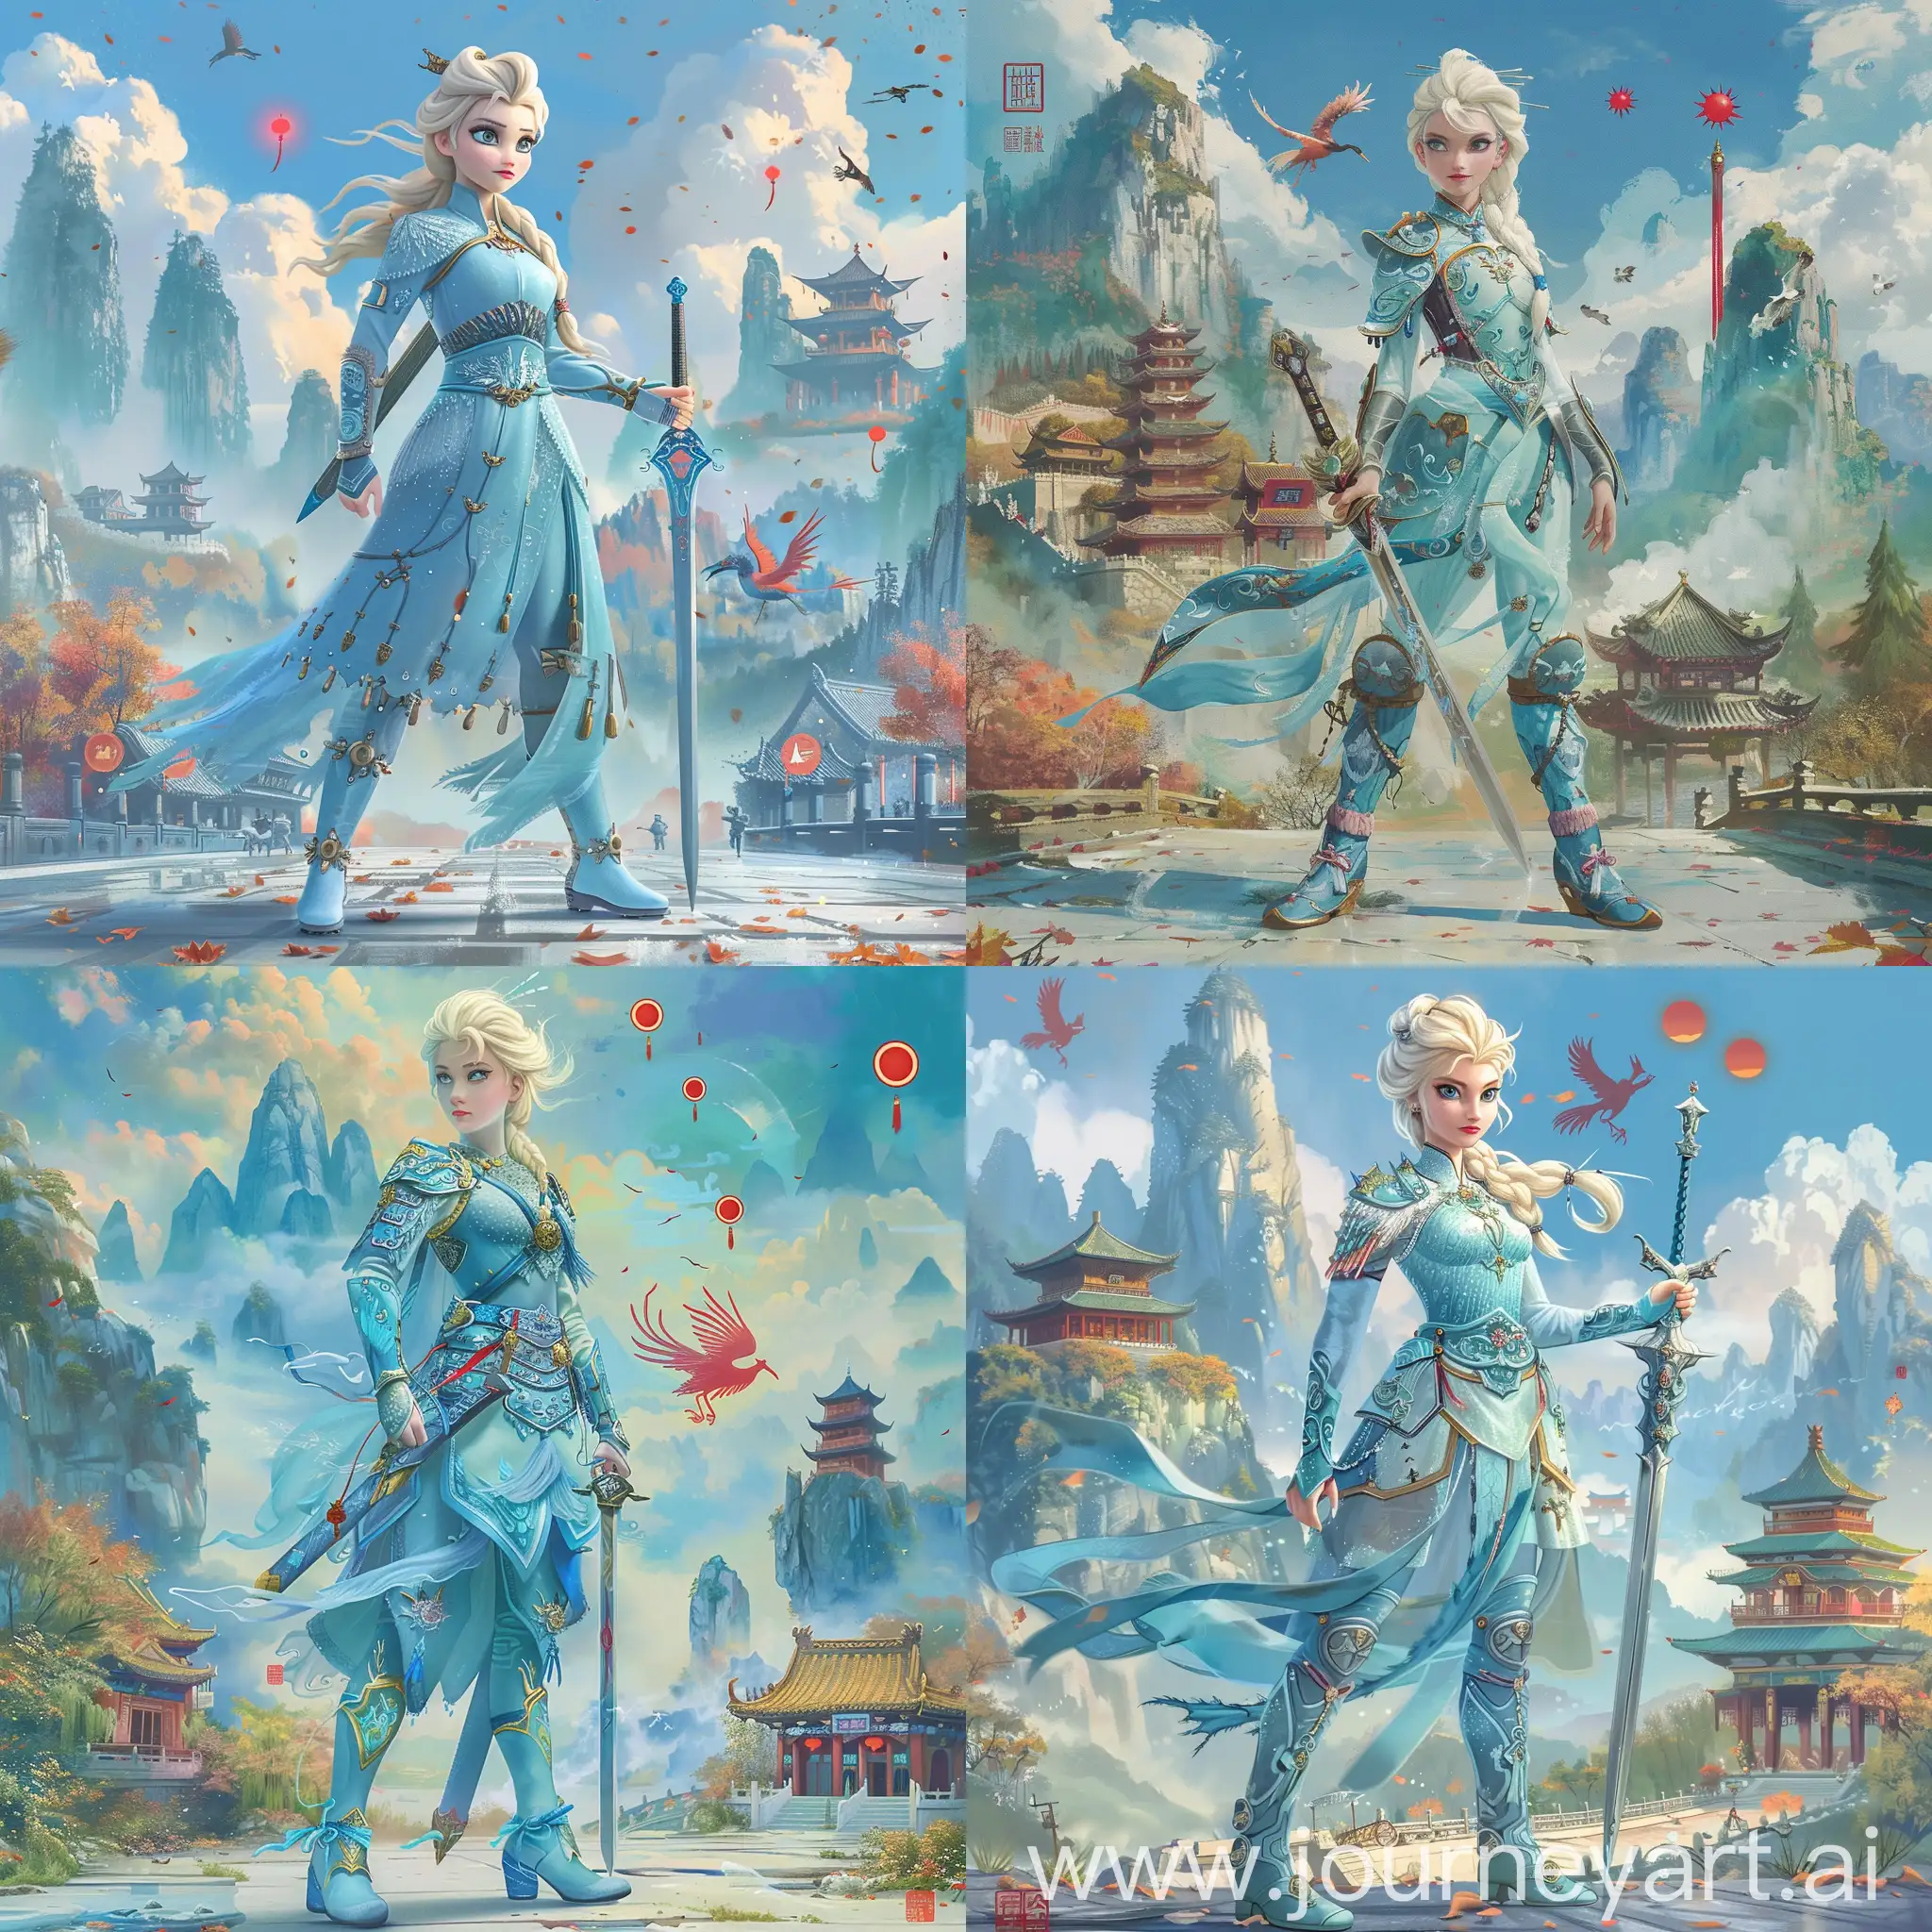 Historic painting style:

a Disney Norwegian Princess Elsa, she wears light blue and azure color Chinese style medieval armor and boots, she holds a Chinese sword in right hand, 

Chinese Guilin mountains and temple as background, small phoenix and three small red suns in blue sky.